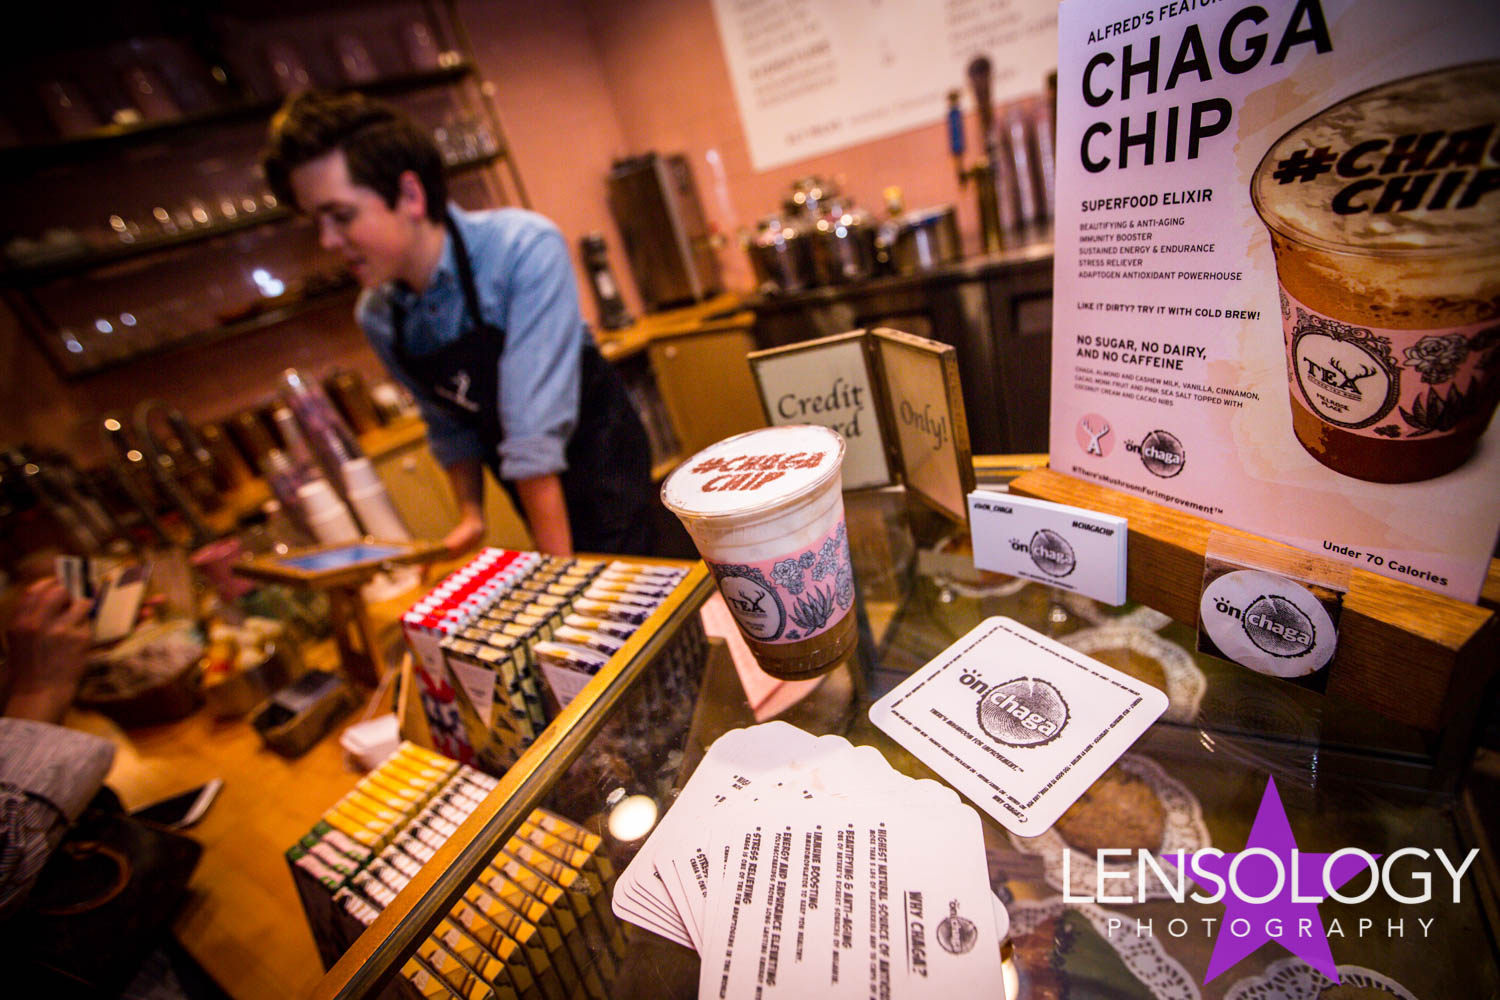 LENSOLOGY.NET - Chaga Chip product launch at Albert Tea Rooms in Beverly Hills, LA, CA.
All images are copyright of Lensology.net
Email: info@lensology.net
www.lensology.net